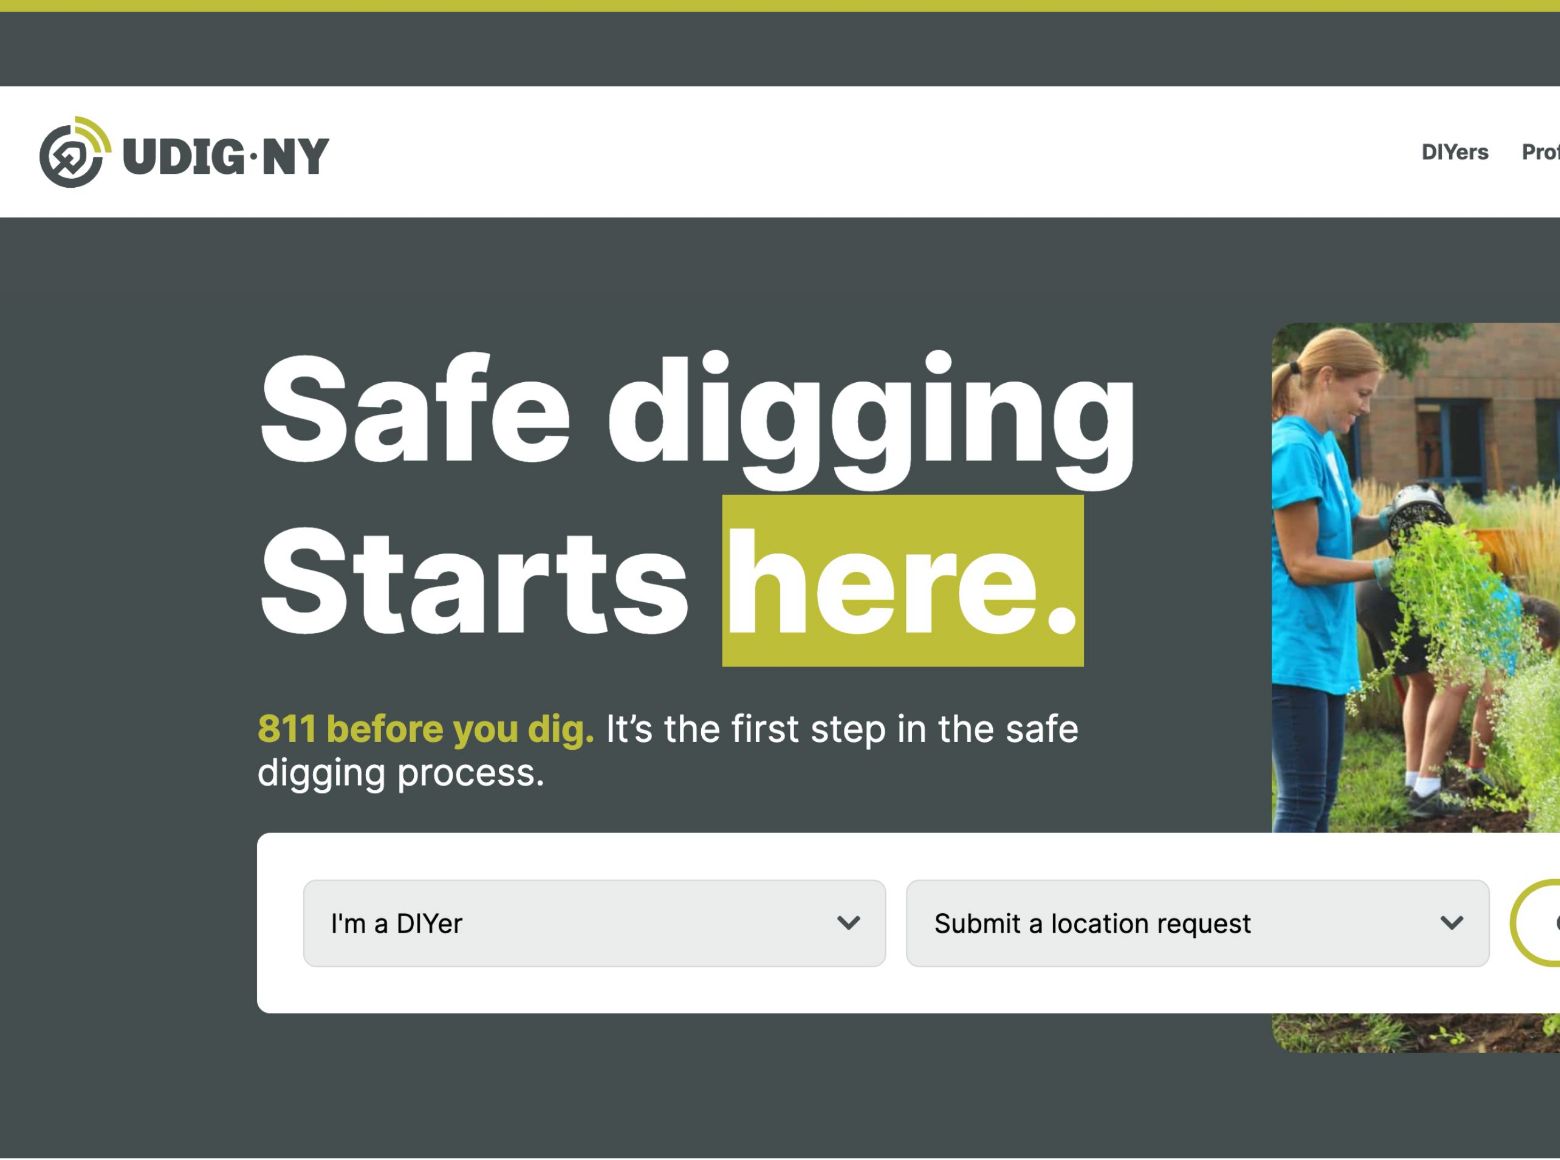 Shot from UDig NY website "Safe digging starts here" with two drop down selector forms below it